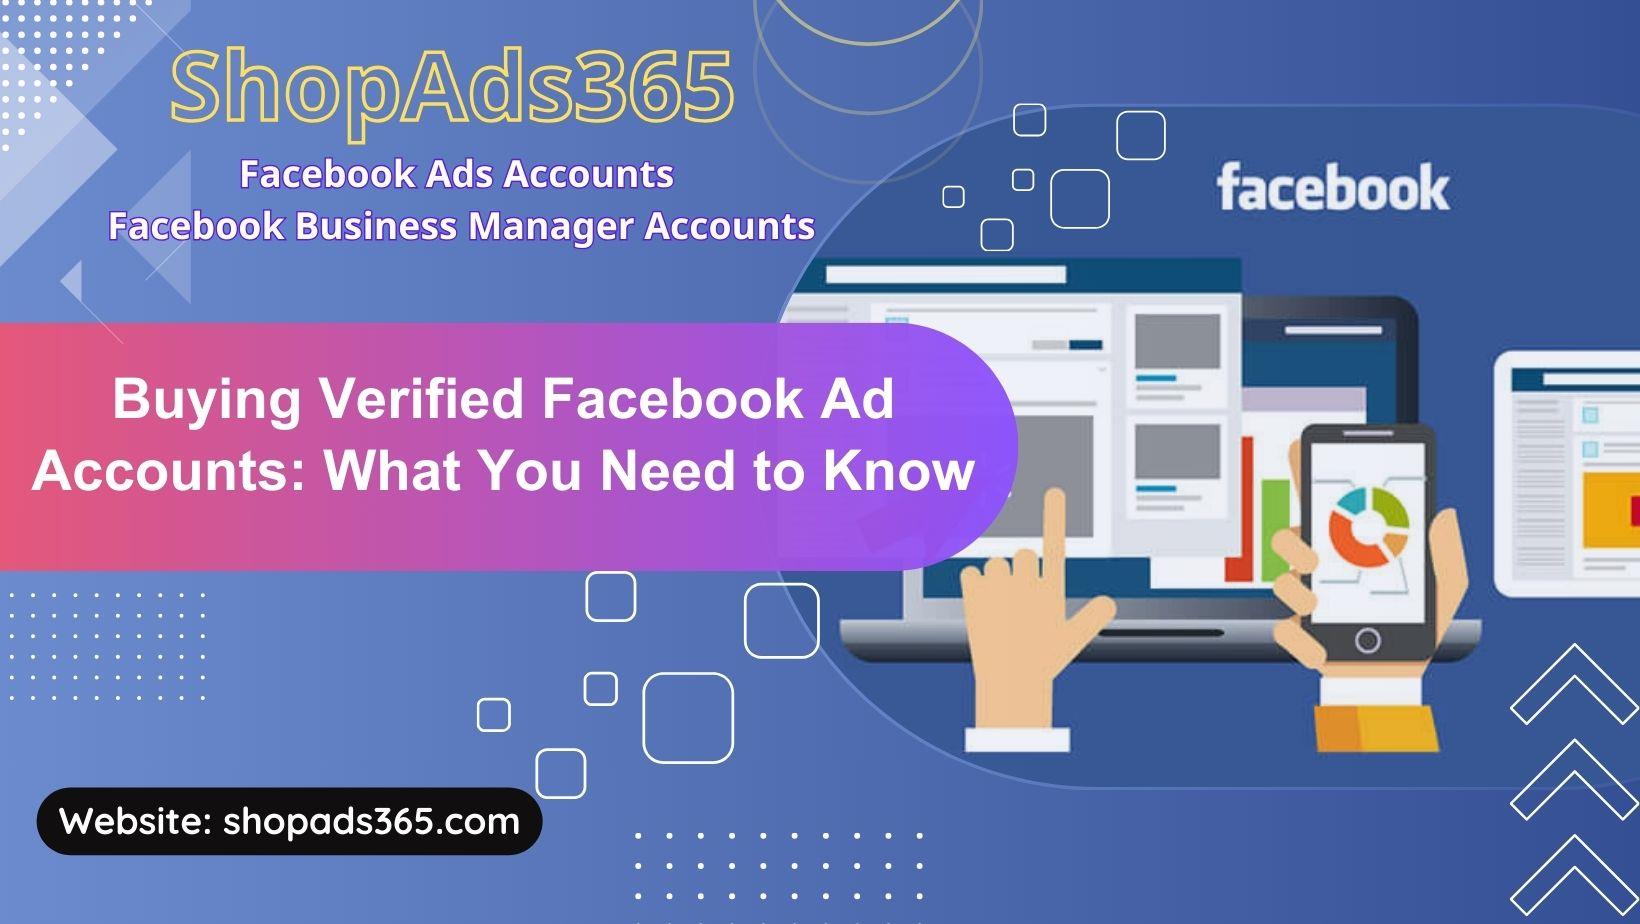 Buying Verified Facebook Ad Accounts: What You Need to Know